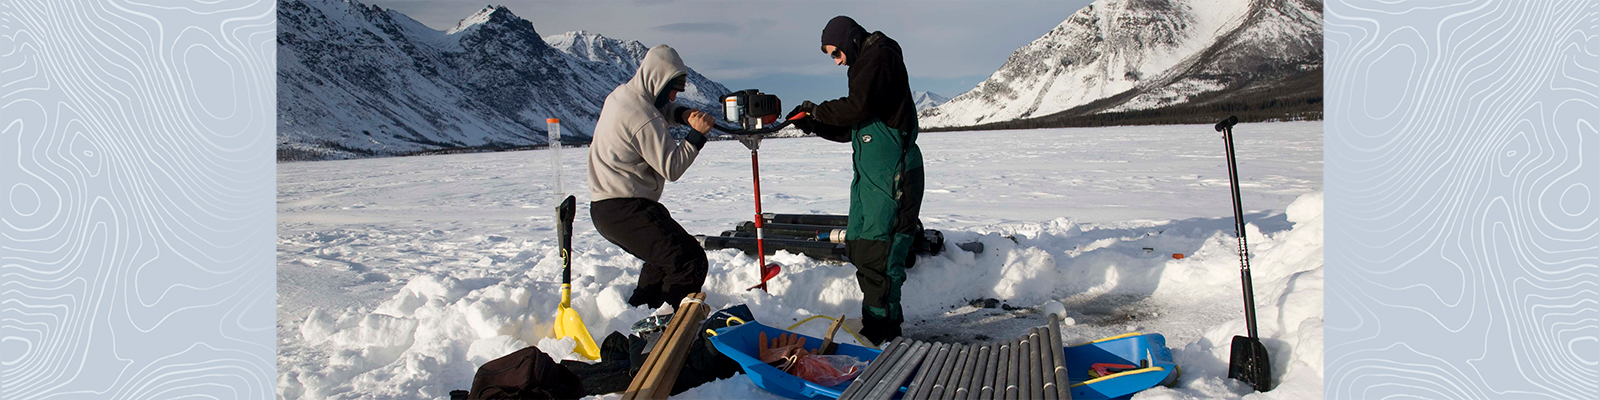 Two researchers working on a snow covered mountain